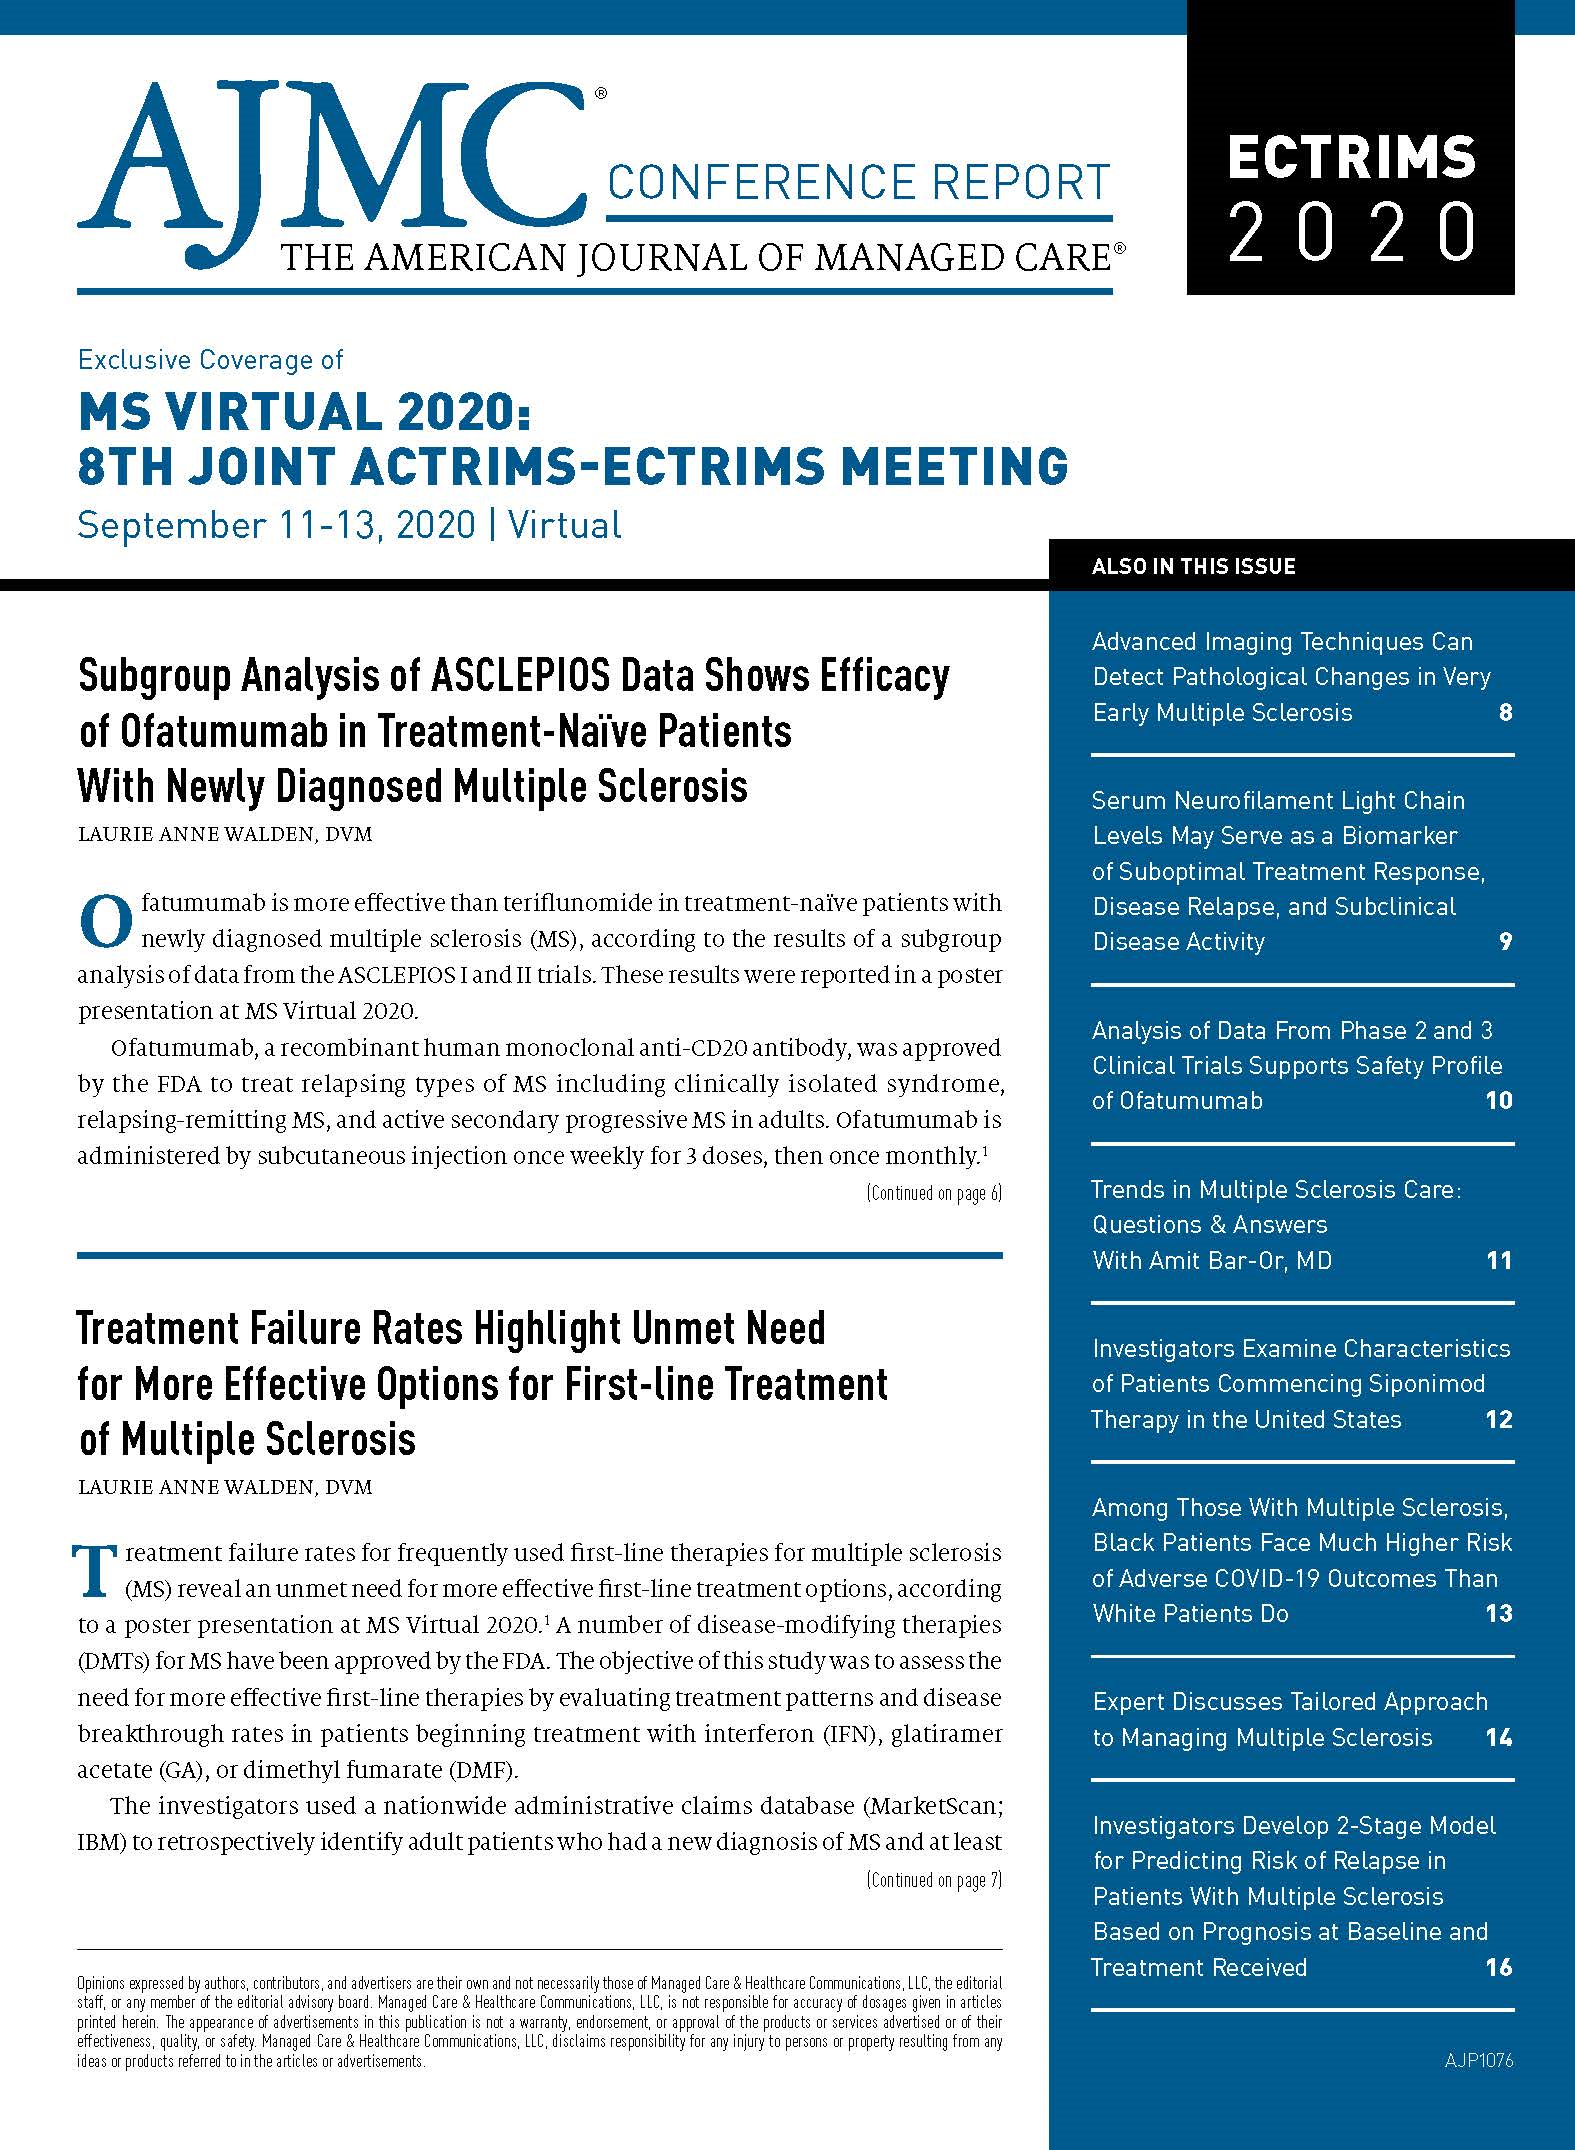 Exclusive Coverage of MS Virtual 2020: 8th Joint ACTRIMS-ECTRIMS Meeting